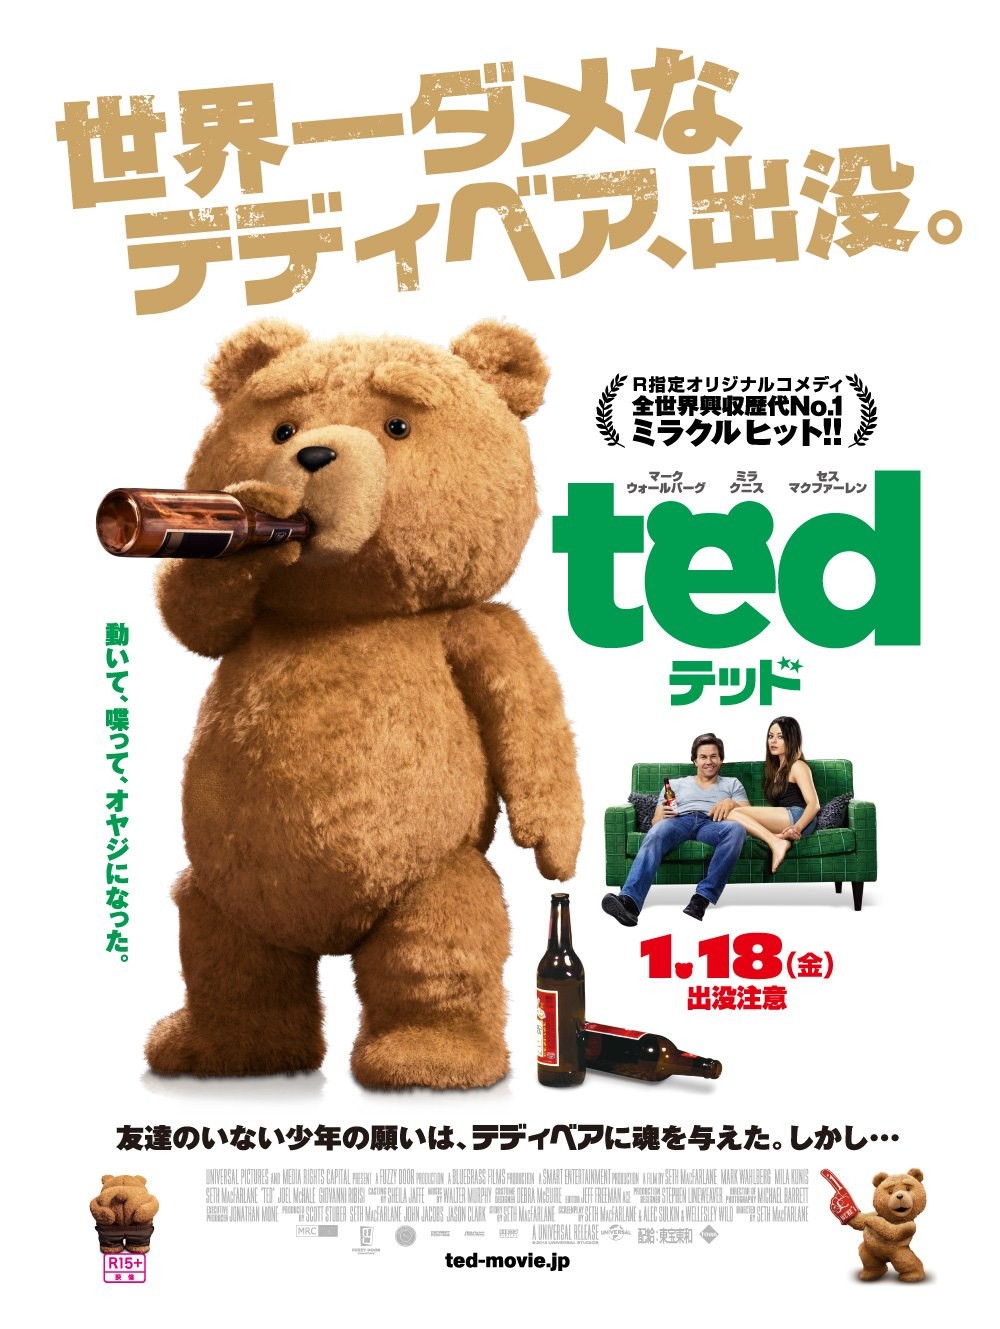 Extra Large Movie Poster Image for Ted (#7 of 7)